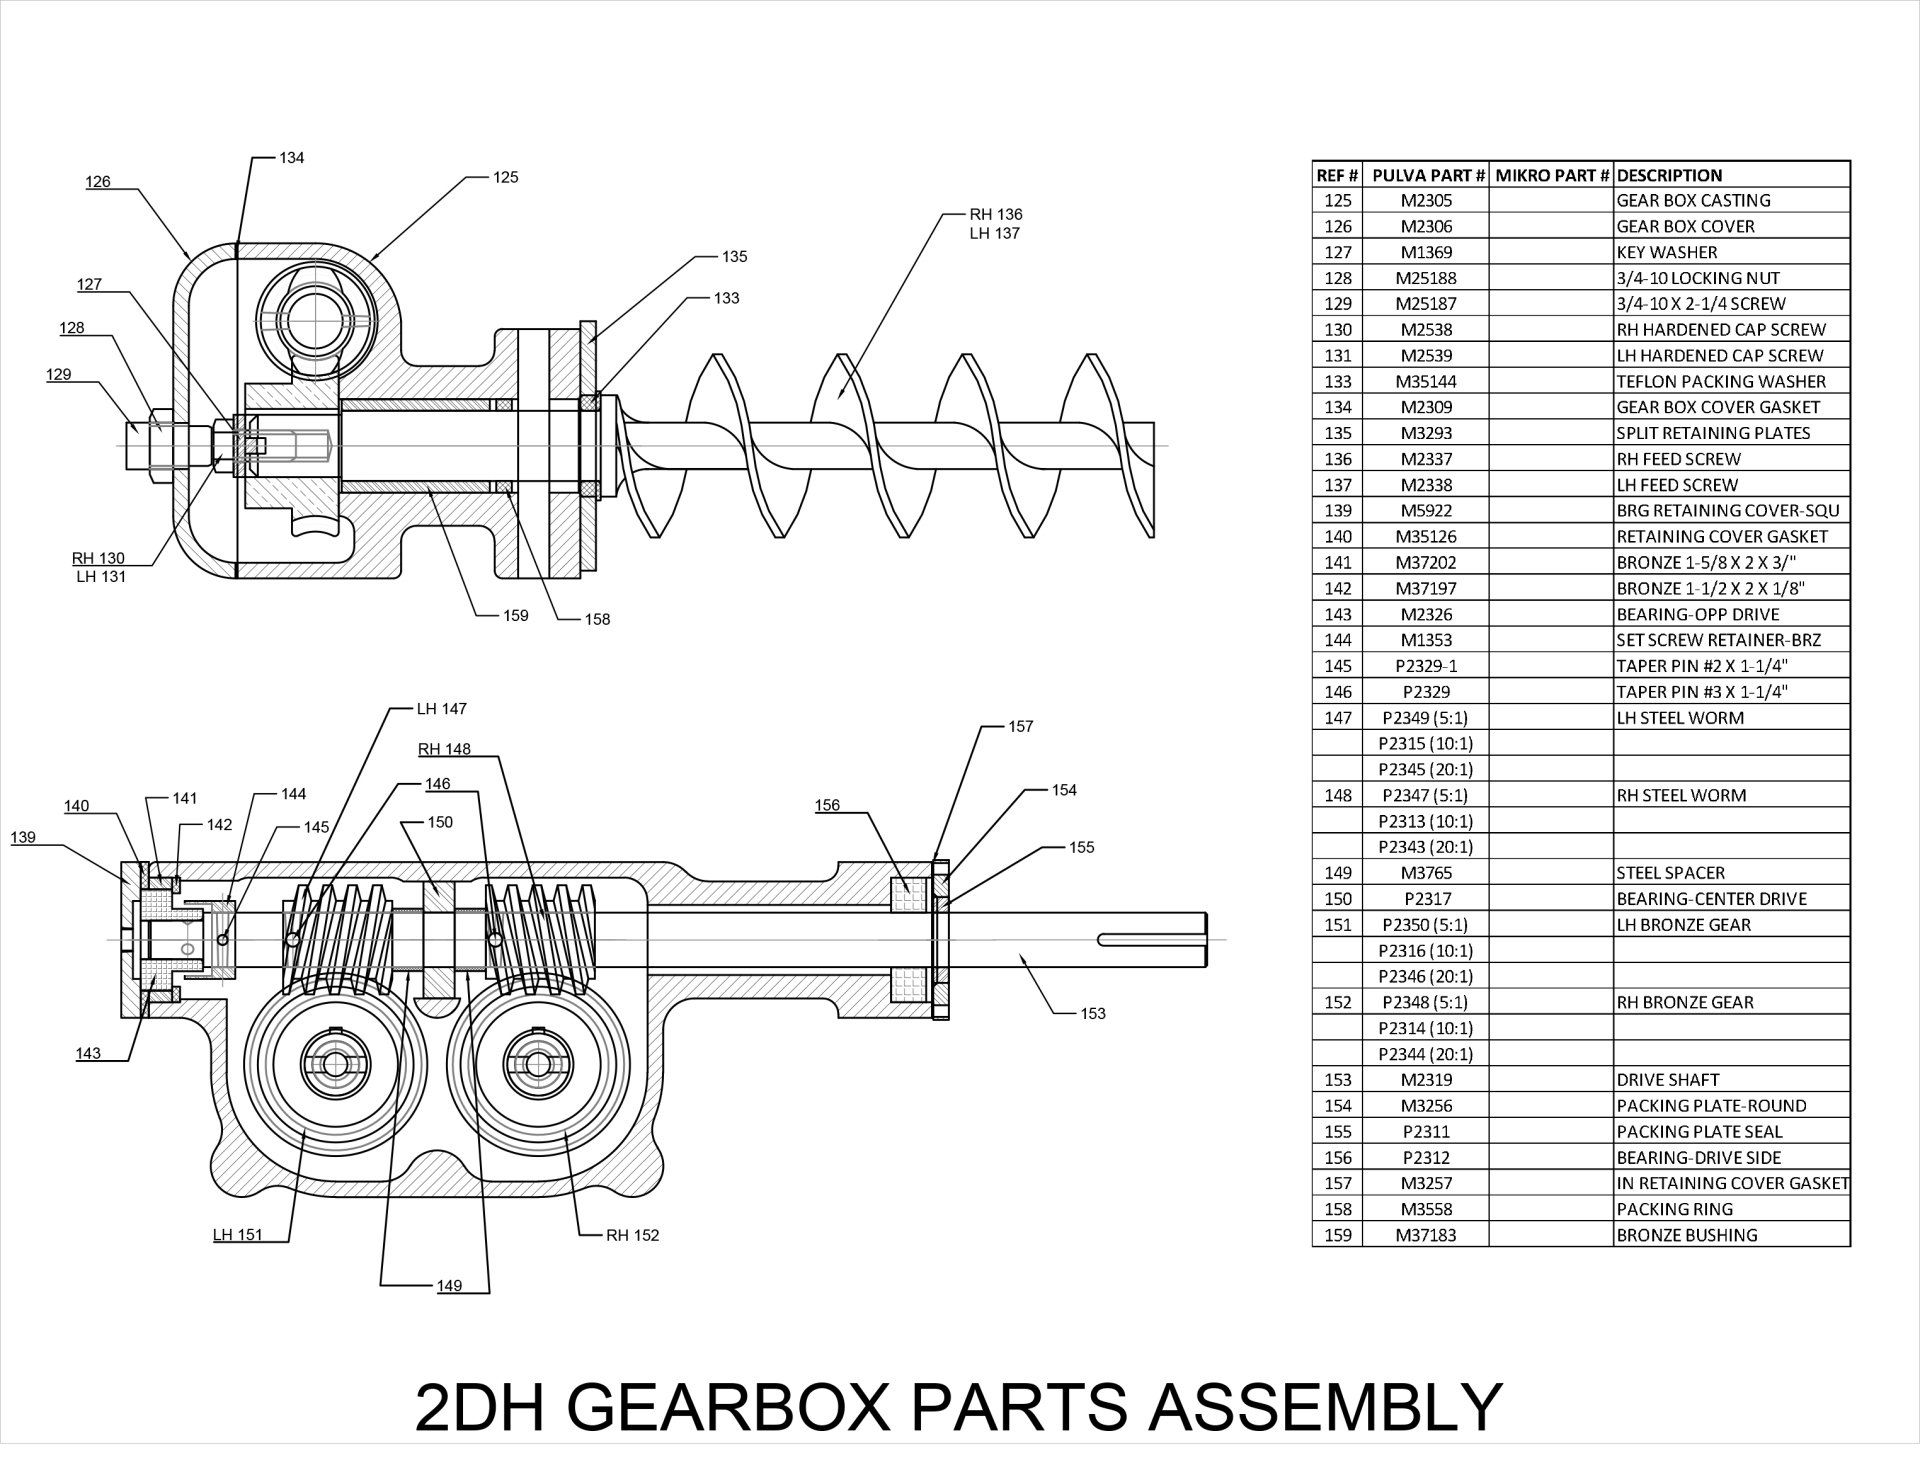 2DH gearbox part number sheet